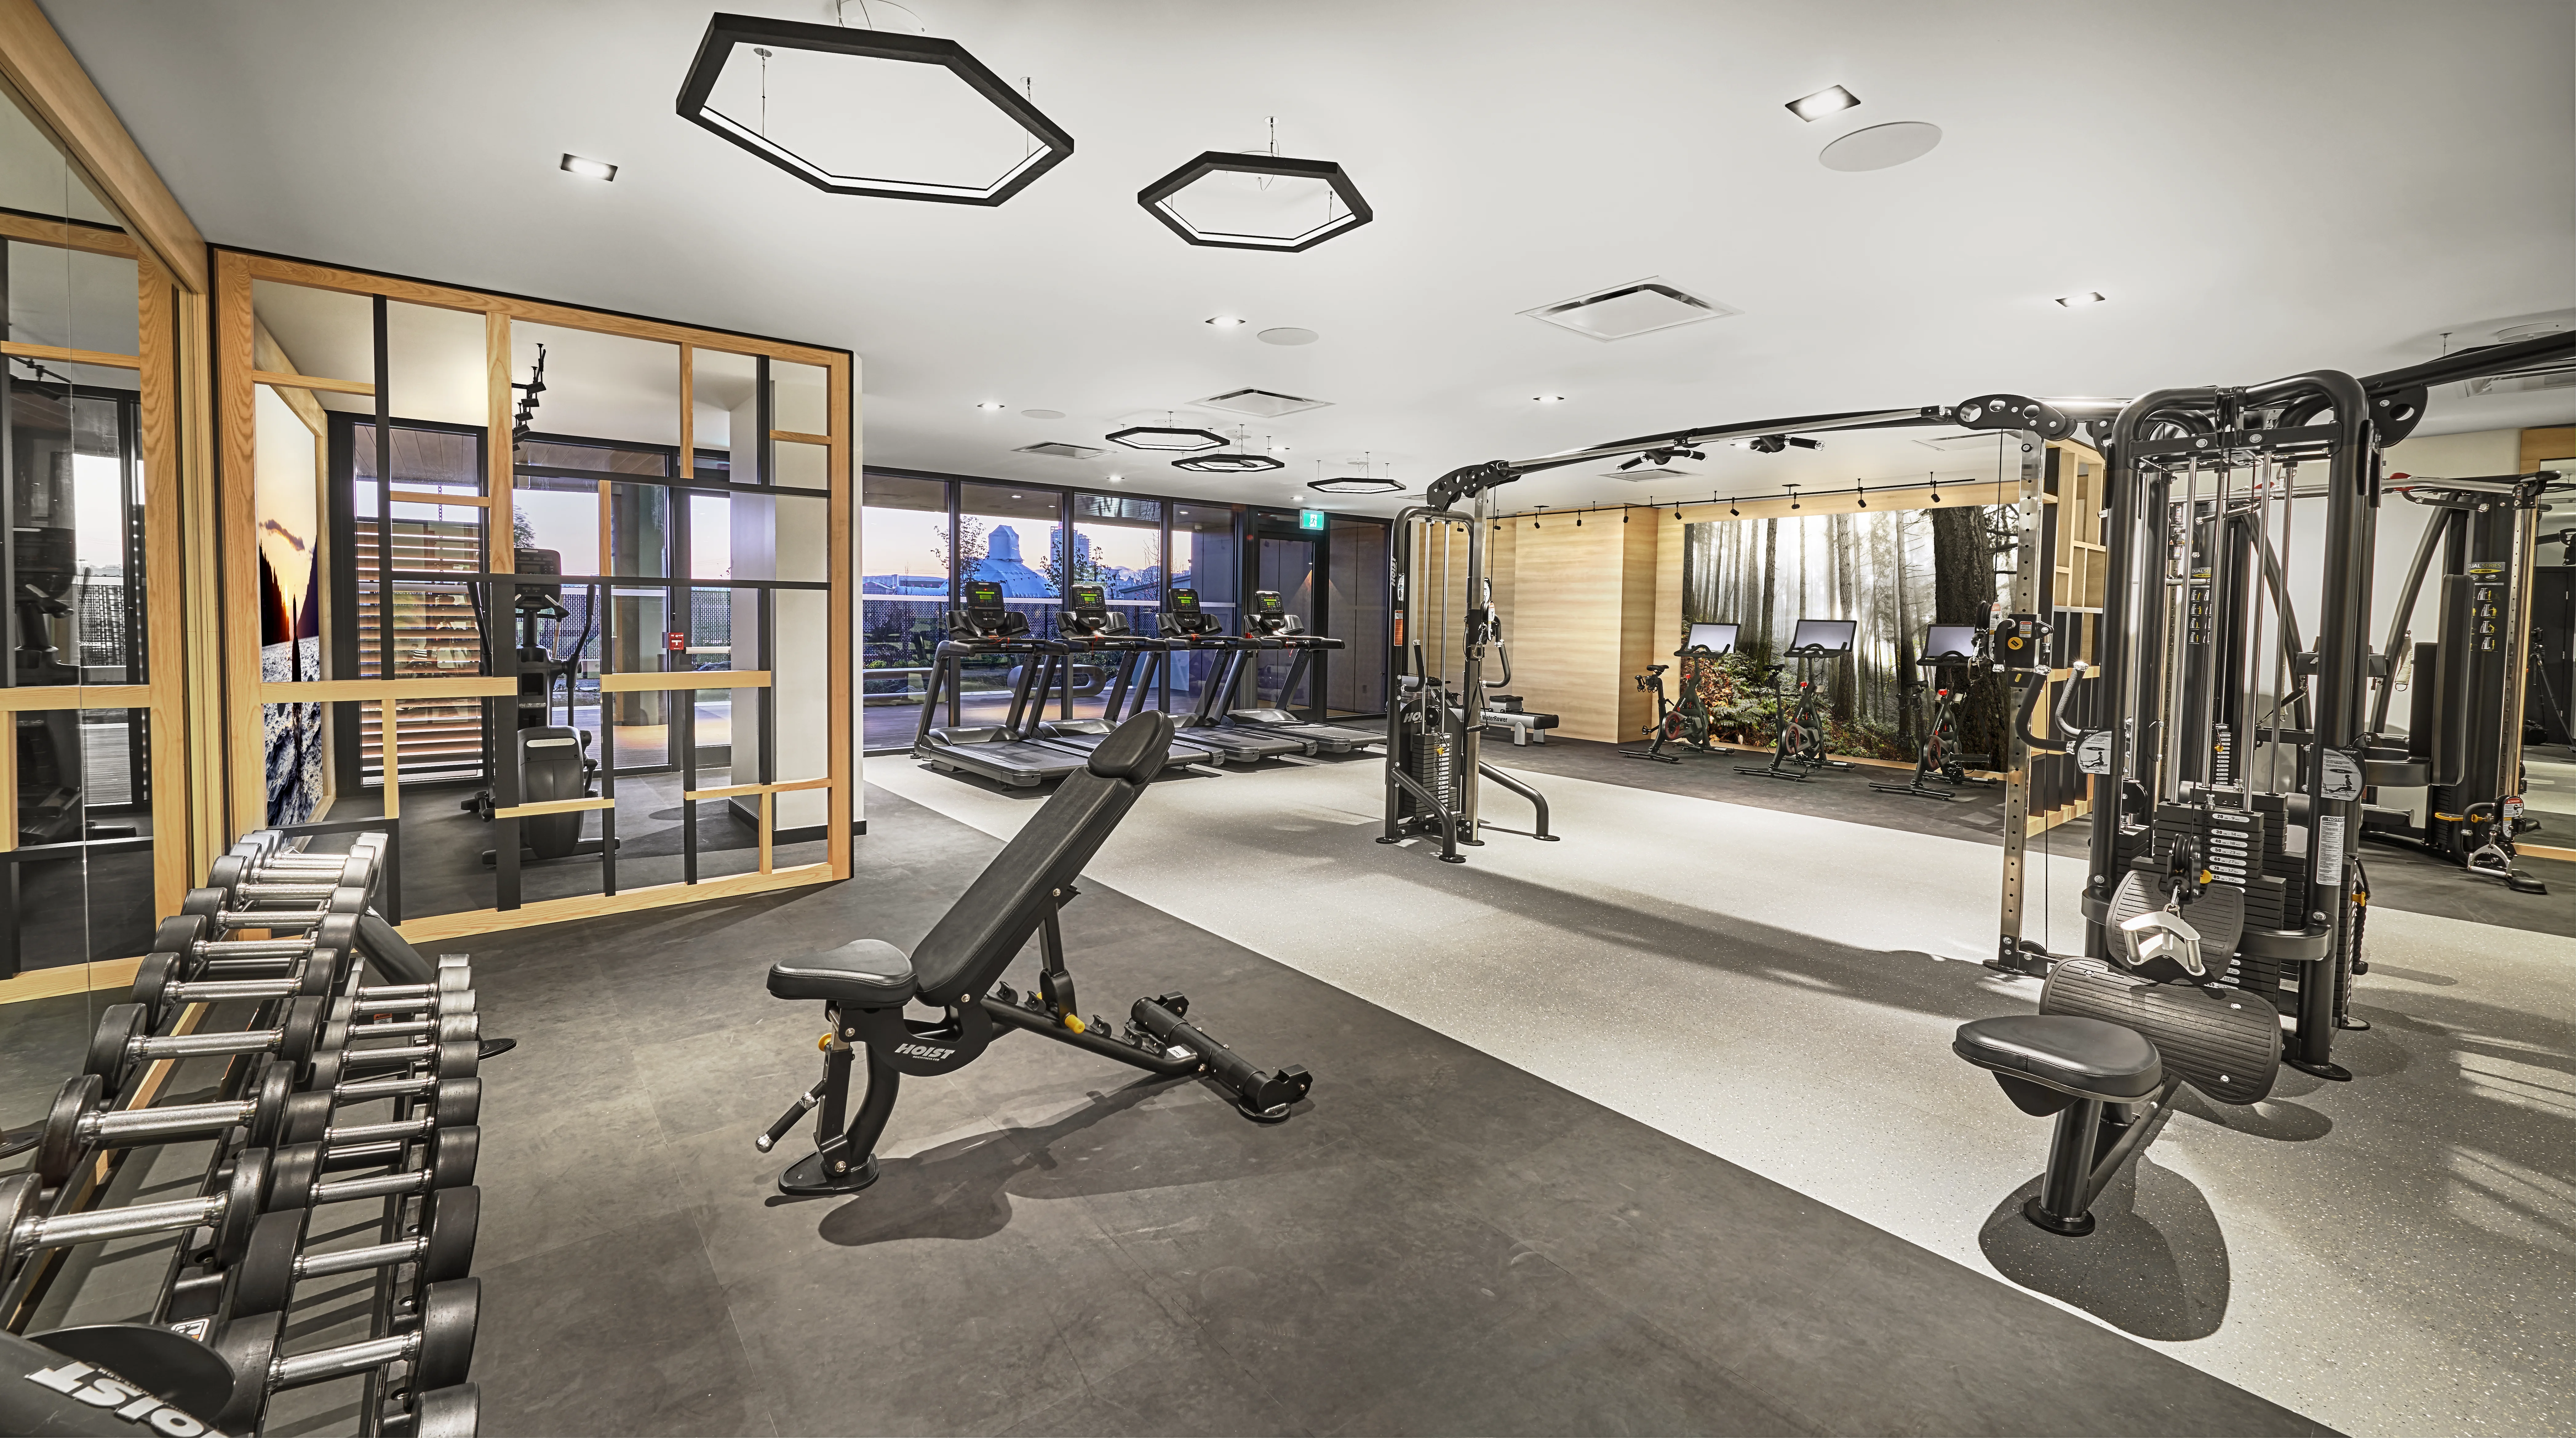 Dockside's state-of-the-art fitness facility allows residents to prioritize healthy living through all four seasons.